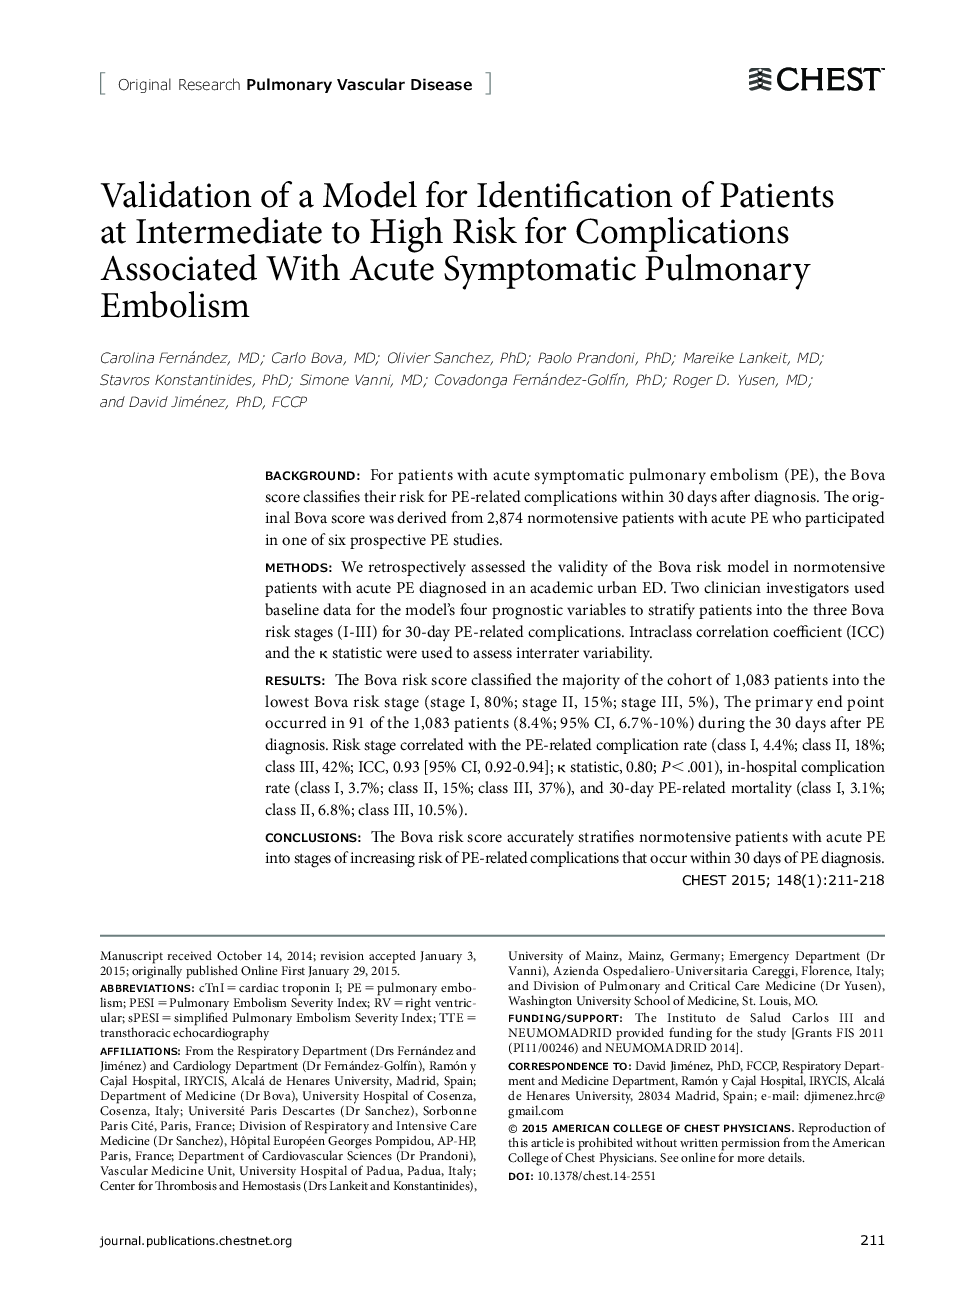 Validation of a Model for Identification of Patients at Intermediate to High Risk for Complications Associated With Acute Symptomatic Pulmonary Embolism